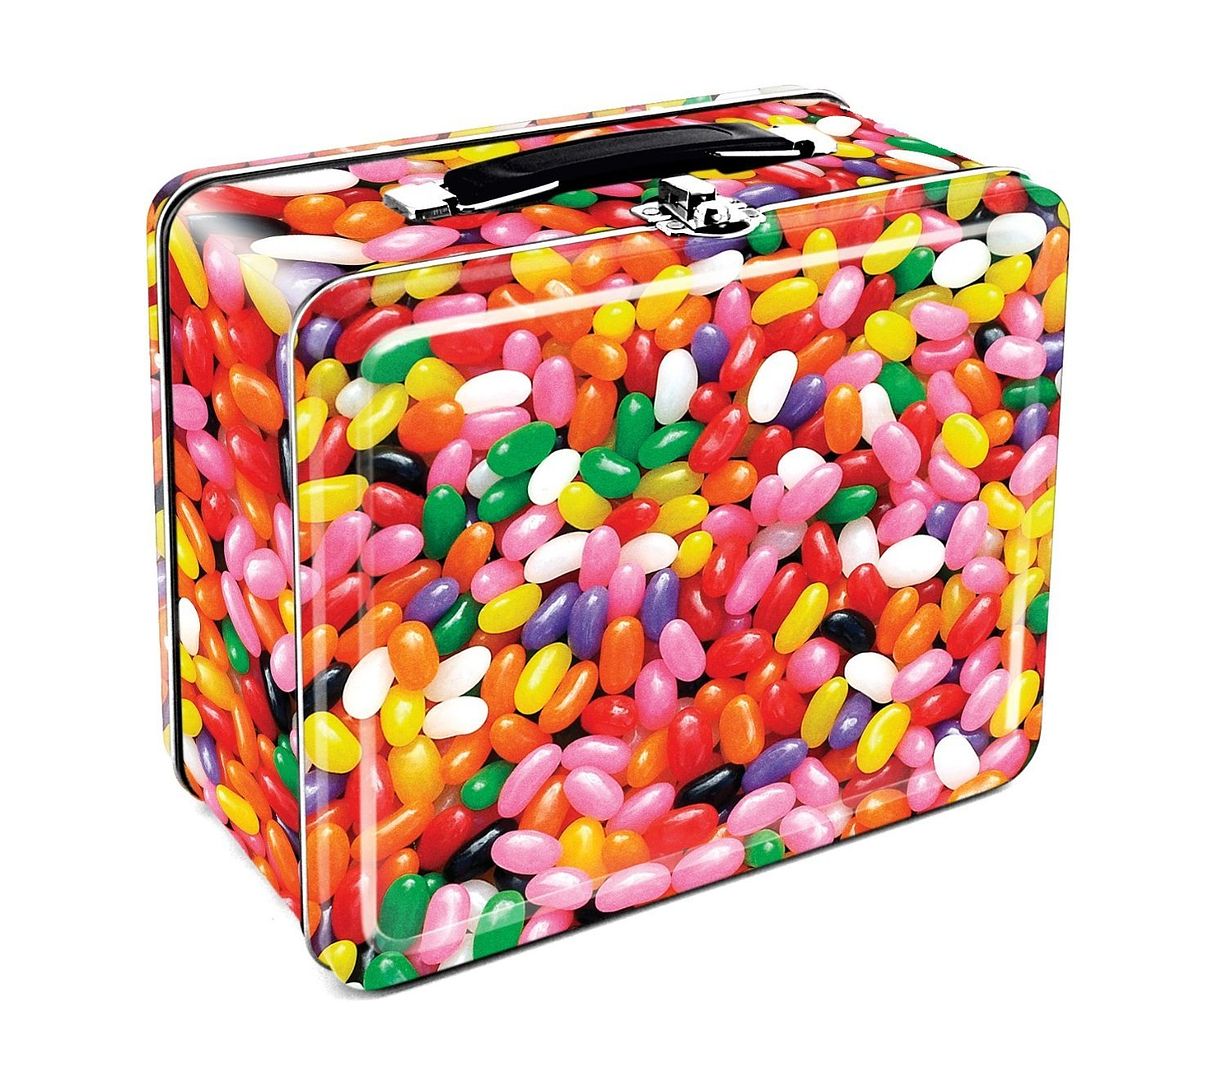 Photo-real jellybean lunch box by Aquarius | Coolest lunch boxes and bags for back to school